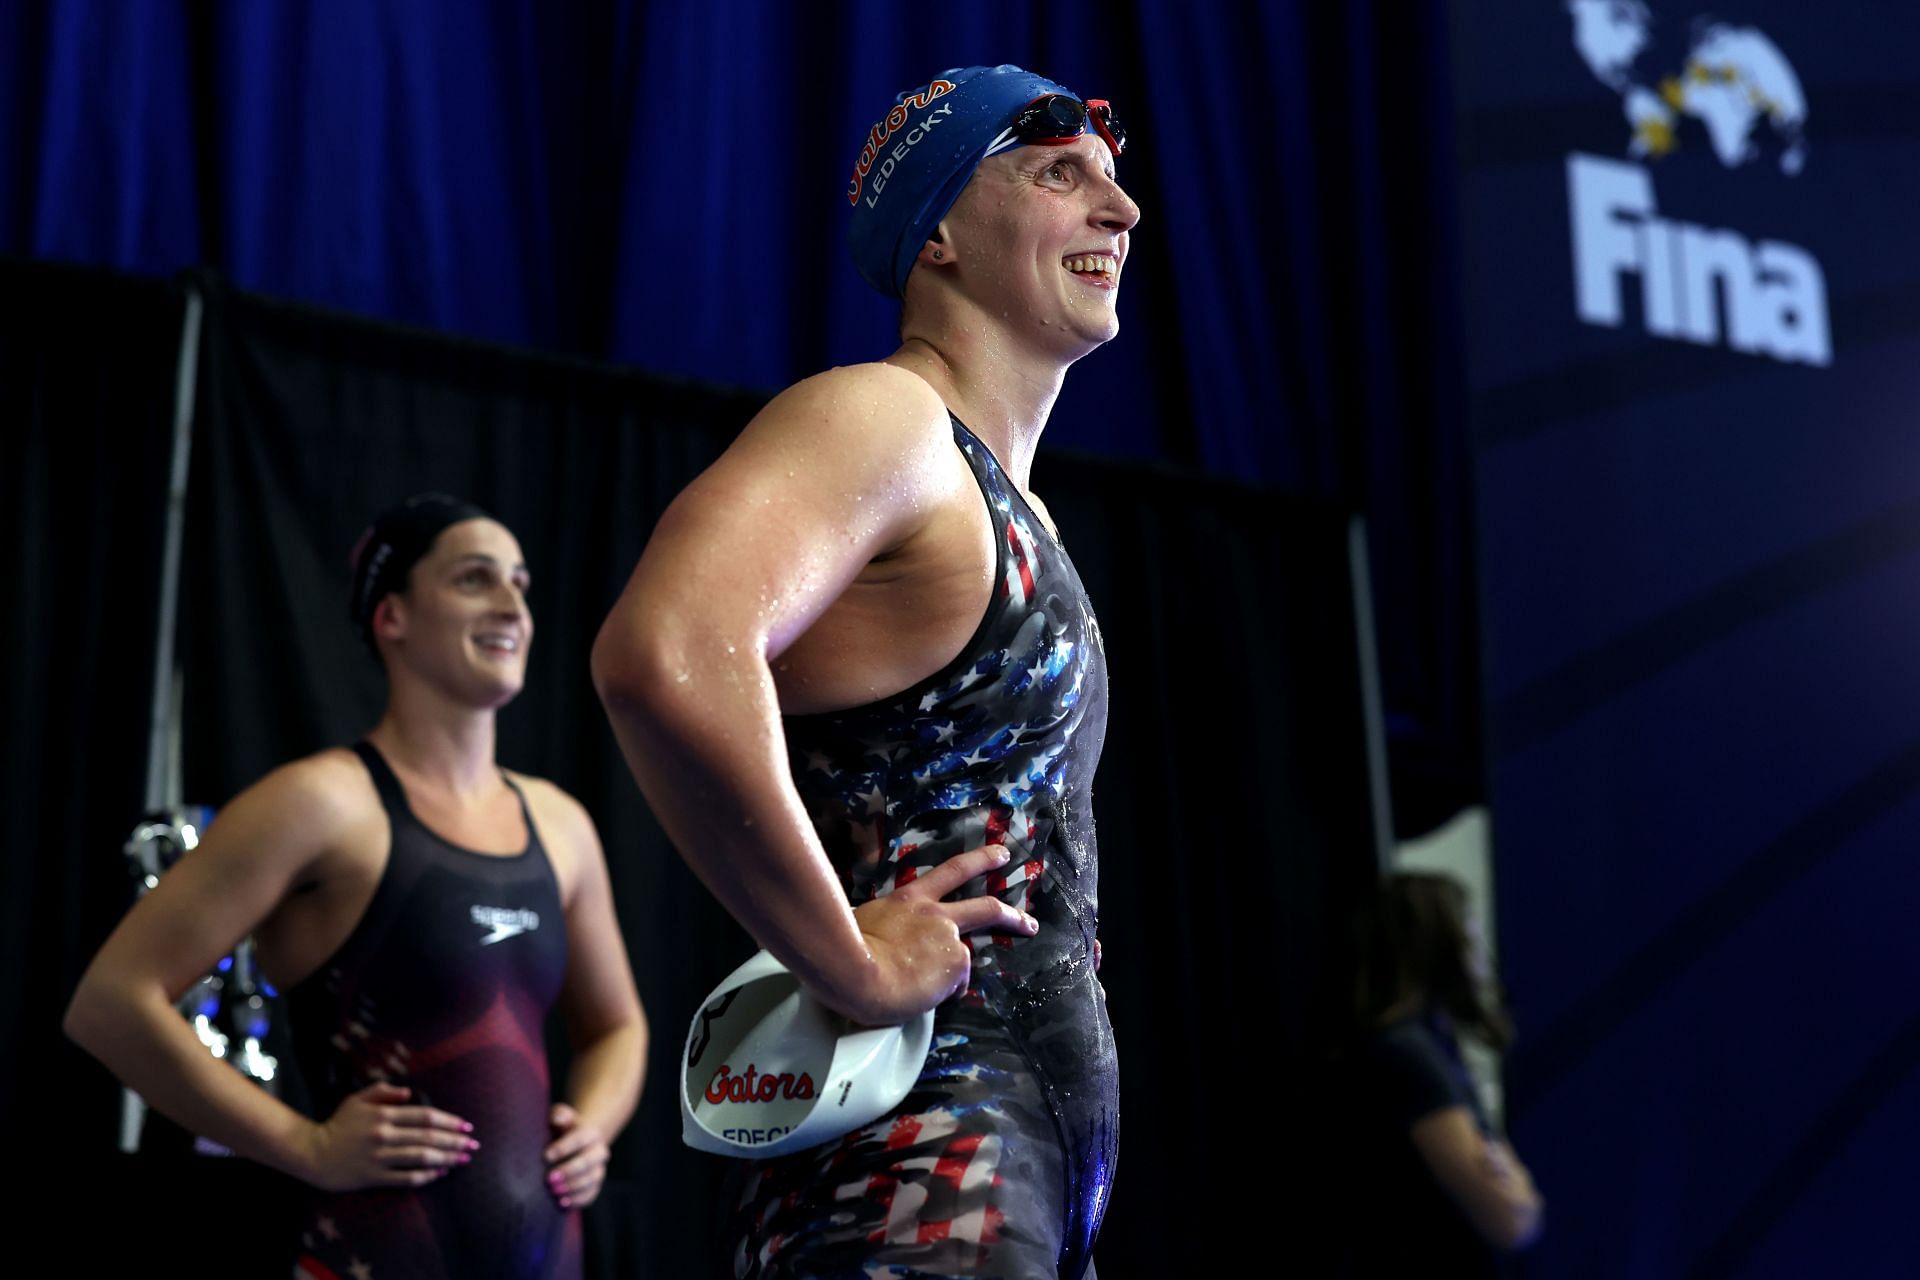 Ledecky at the FINA Swimming World Cup 2022 (Image via Maddie Meyer/Getty Images)